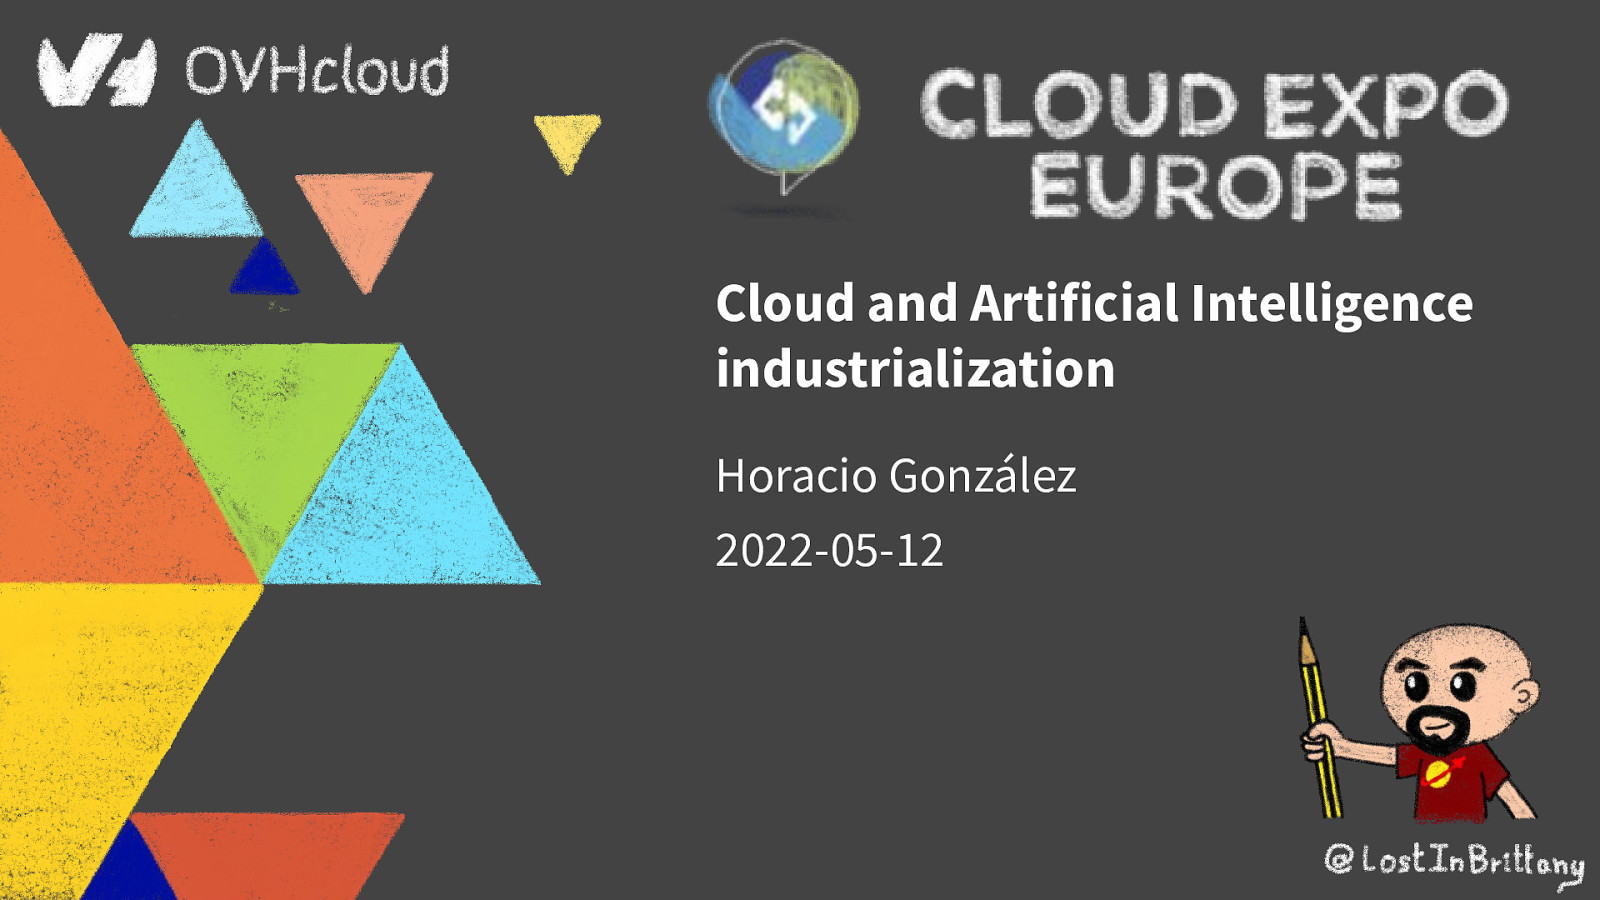 Industrializing AI in the cloud